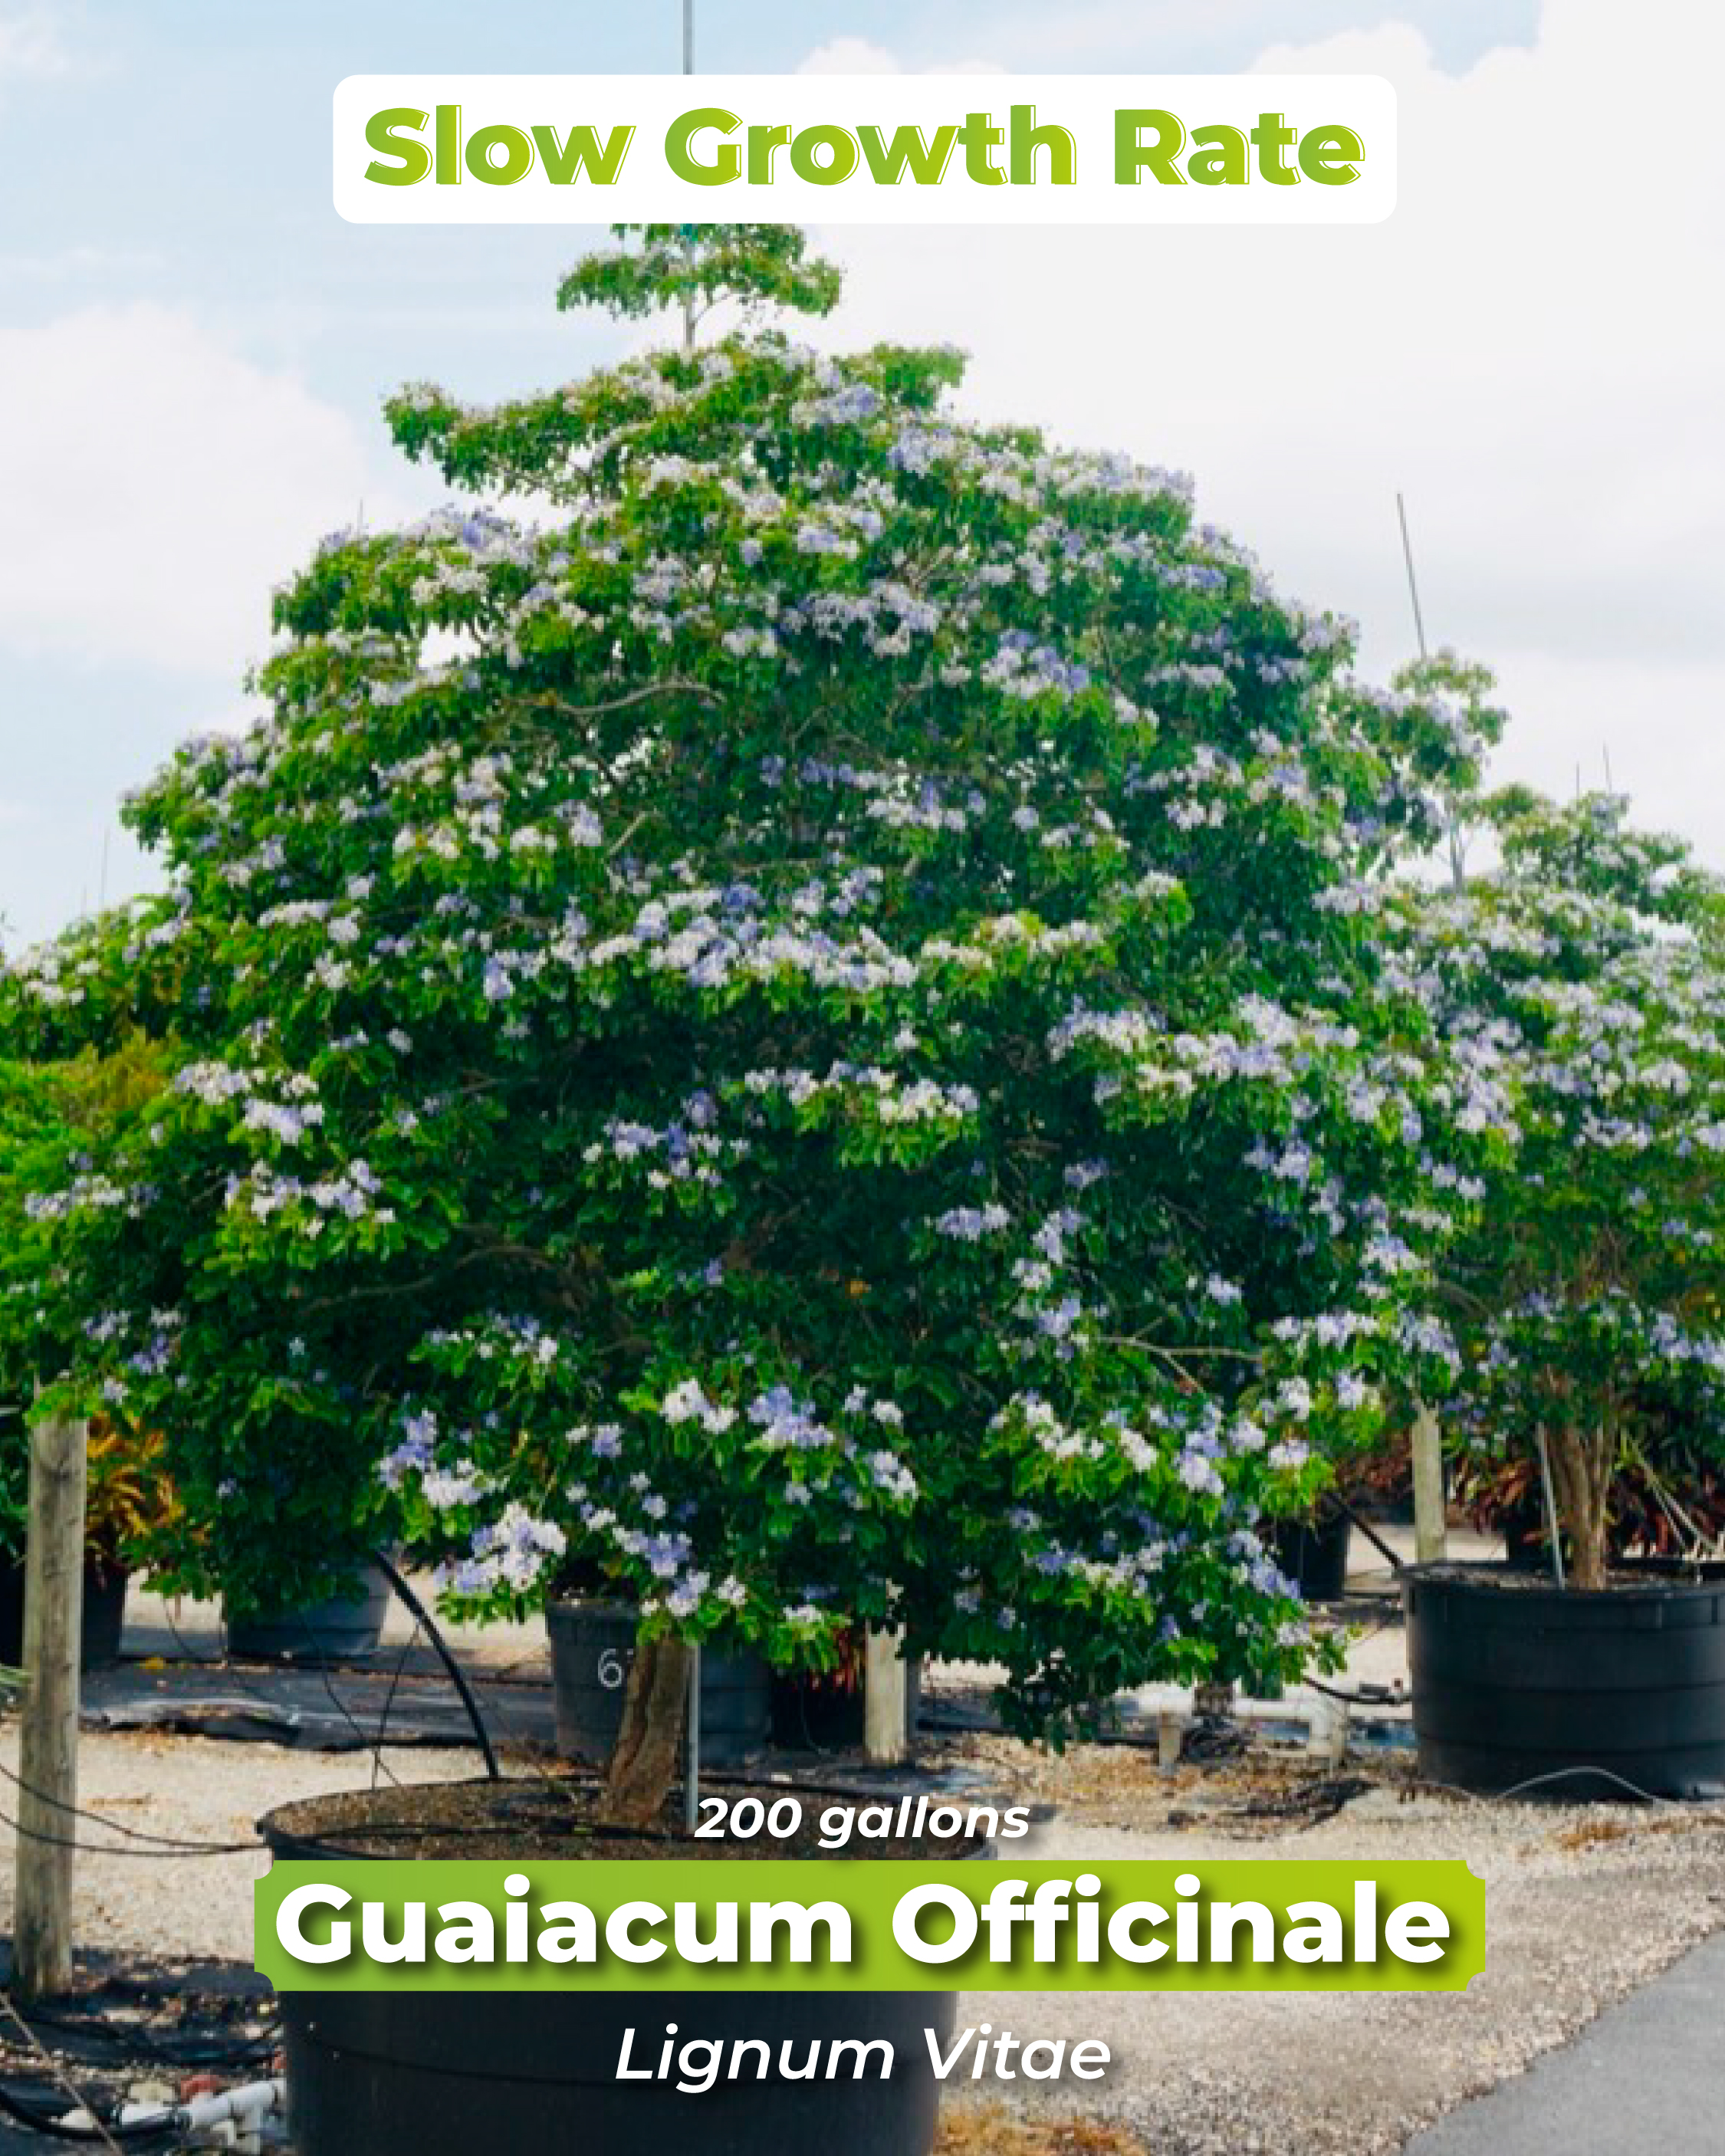 slow-growth-rate-tree-guiacum-officinale-lignum-vitae-tree-of-life